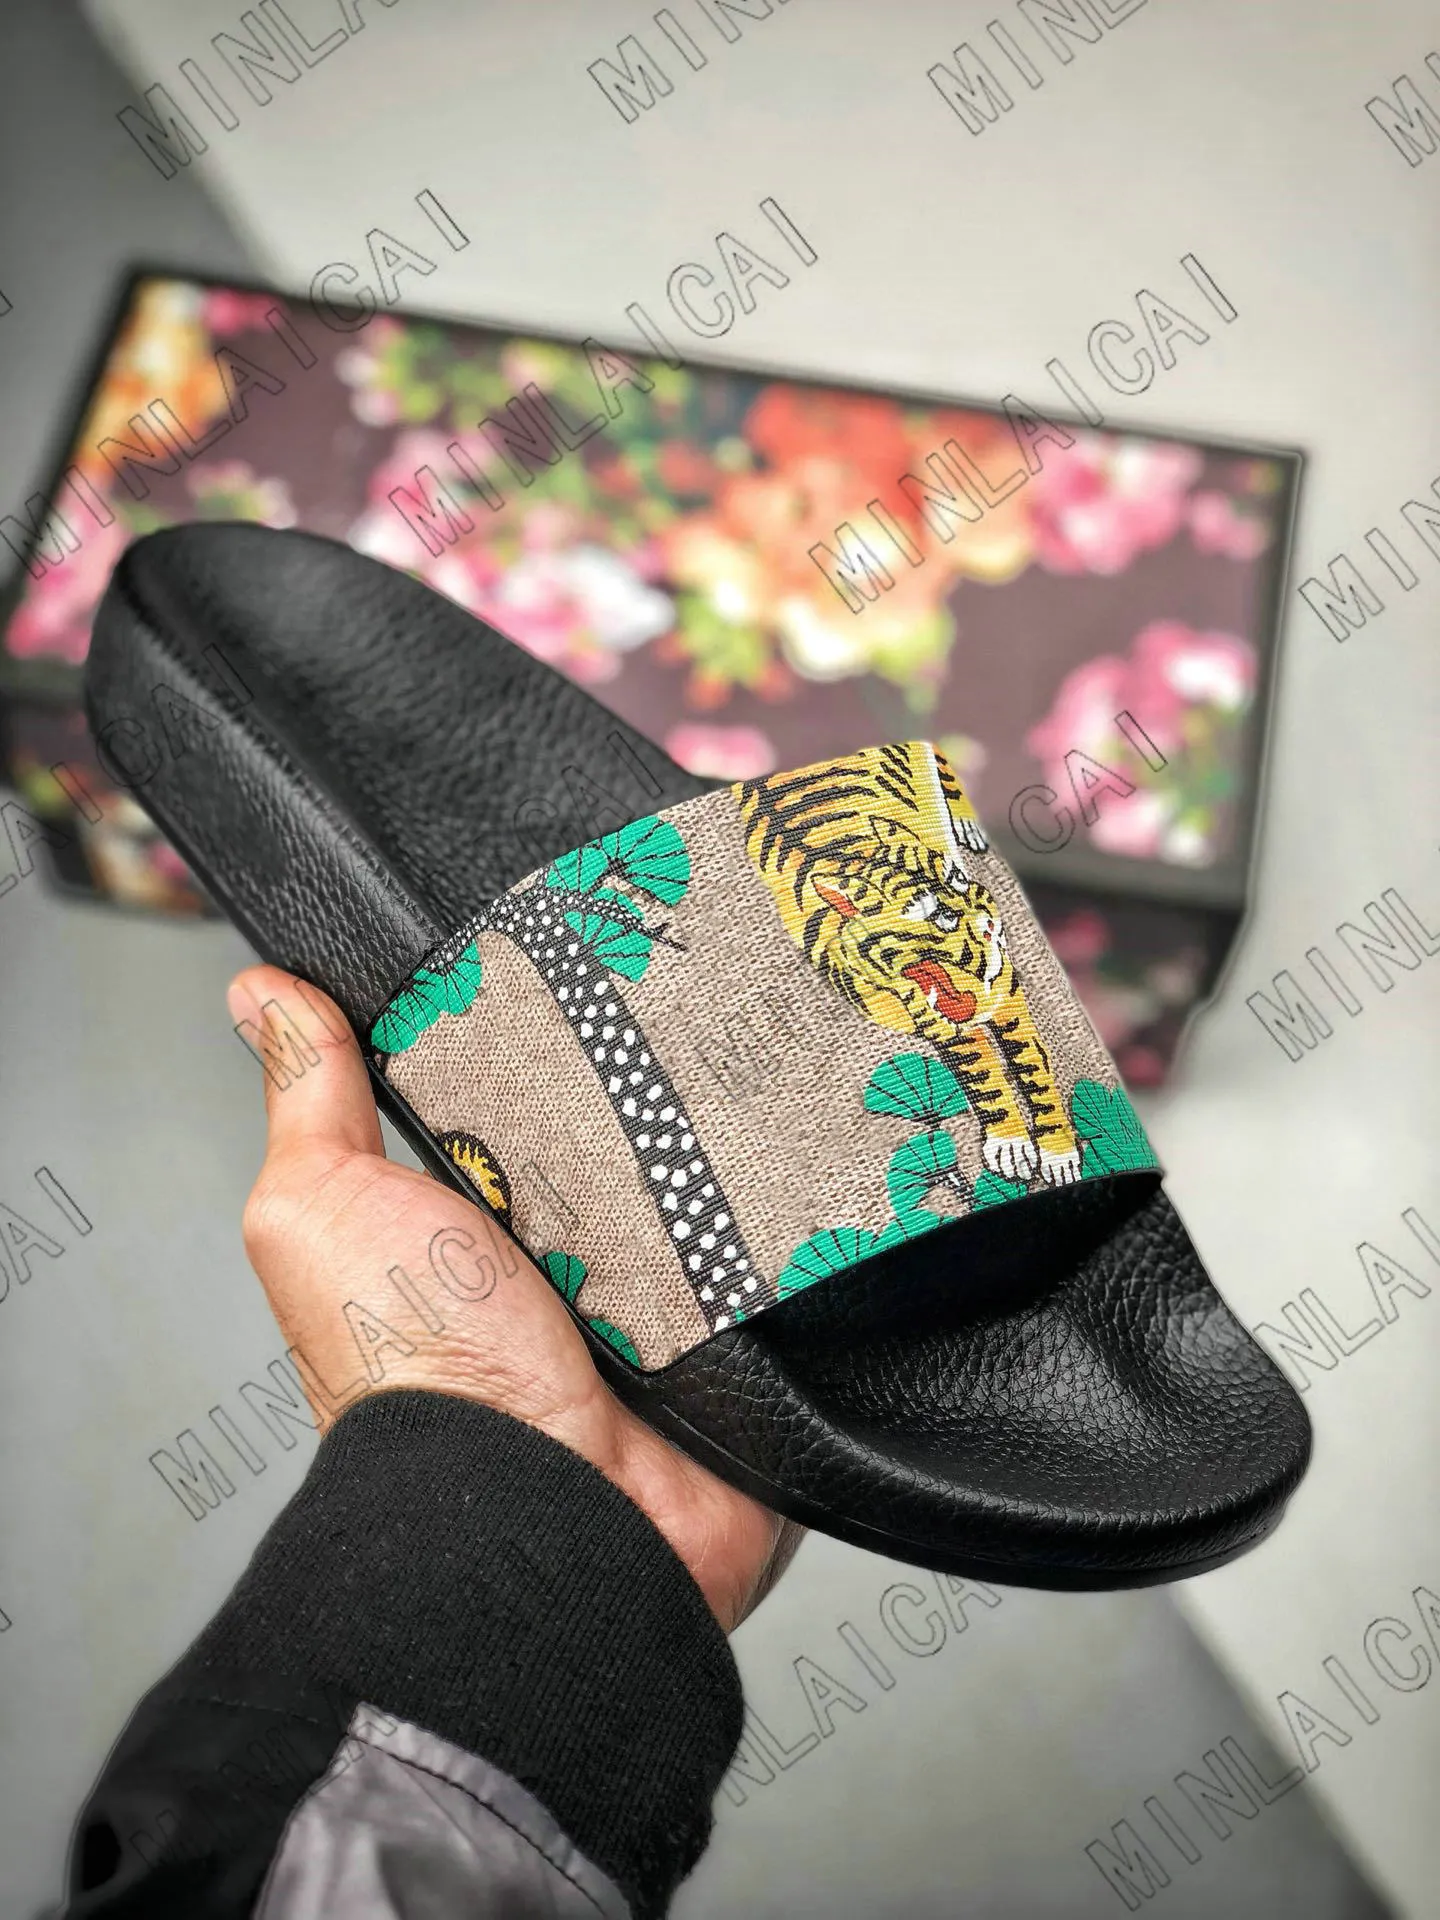 Italy Stripe Bee Tiger Flower Men Designer Slippers Womens Luxurys Designers Sandals Canvas Leather Outdoor Off The Grid Casual Slipper ACE Beach Flip...